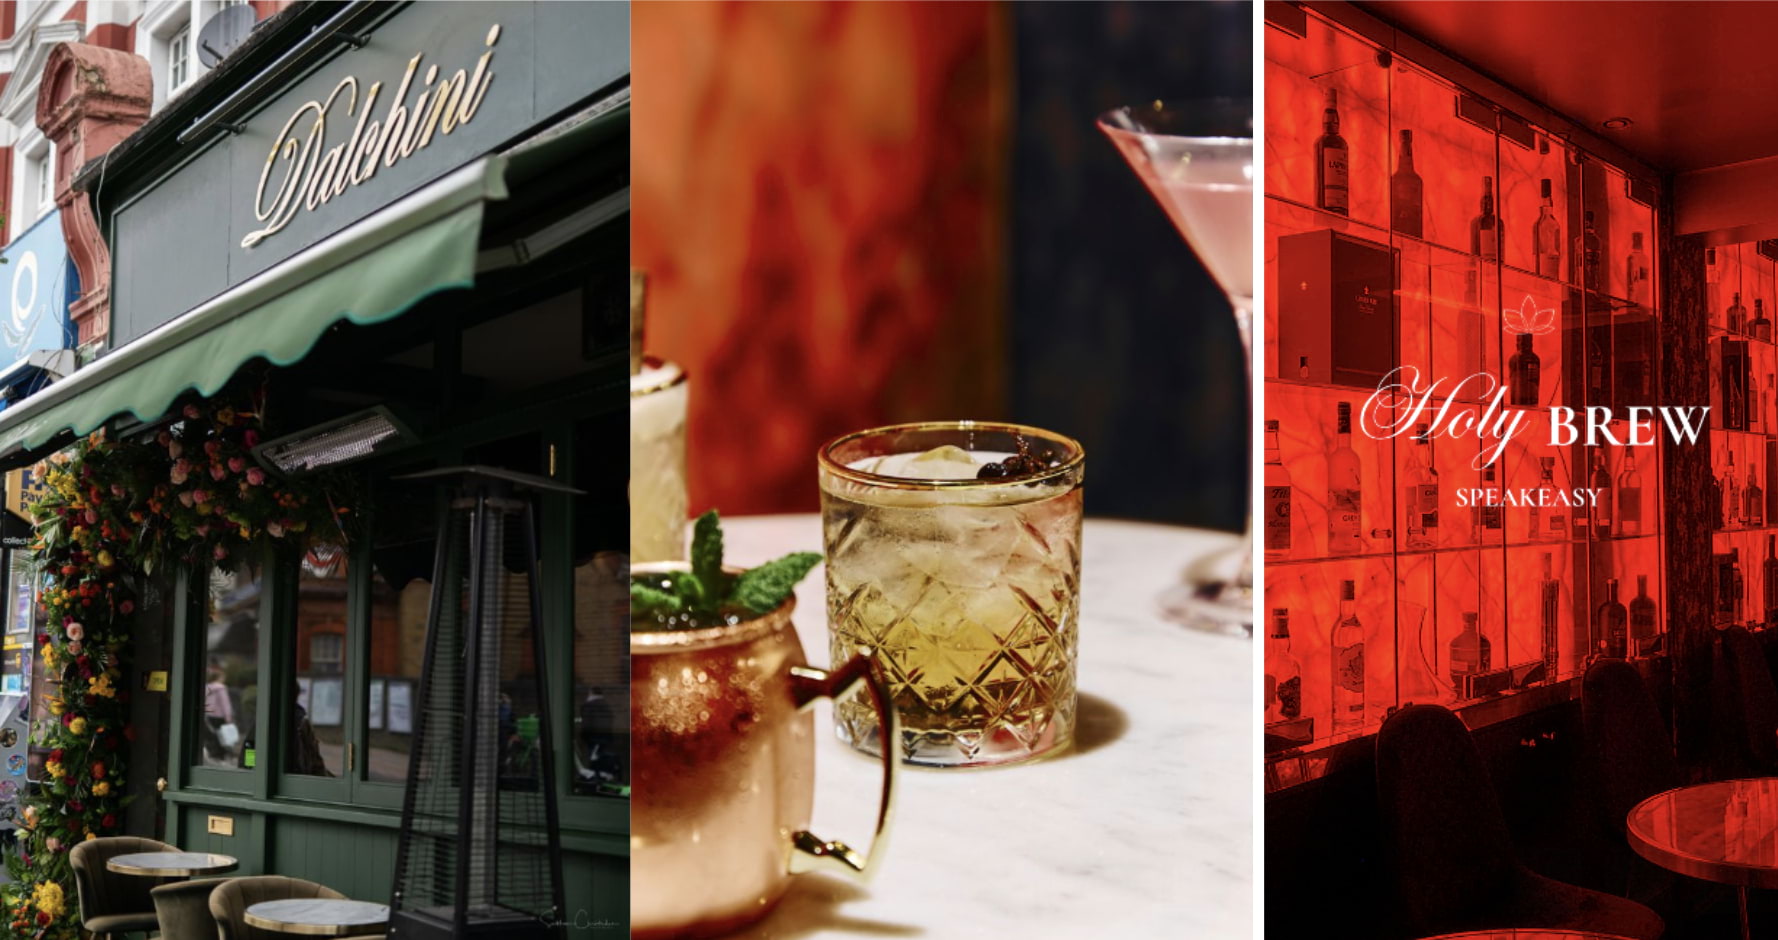 Indo-Chinese restaurant Dalchini unveils speakeasy bar and new afternoon tea